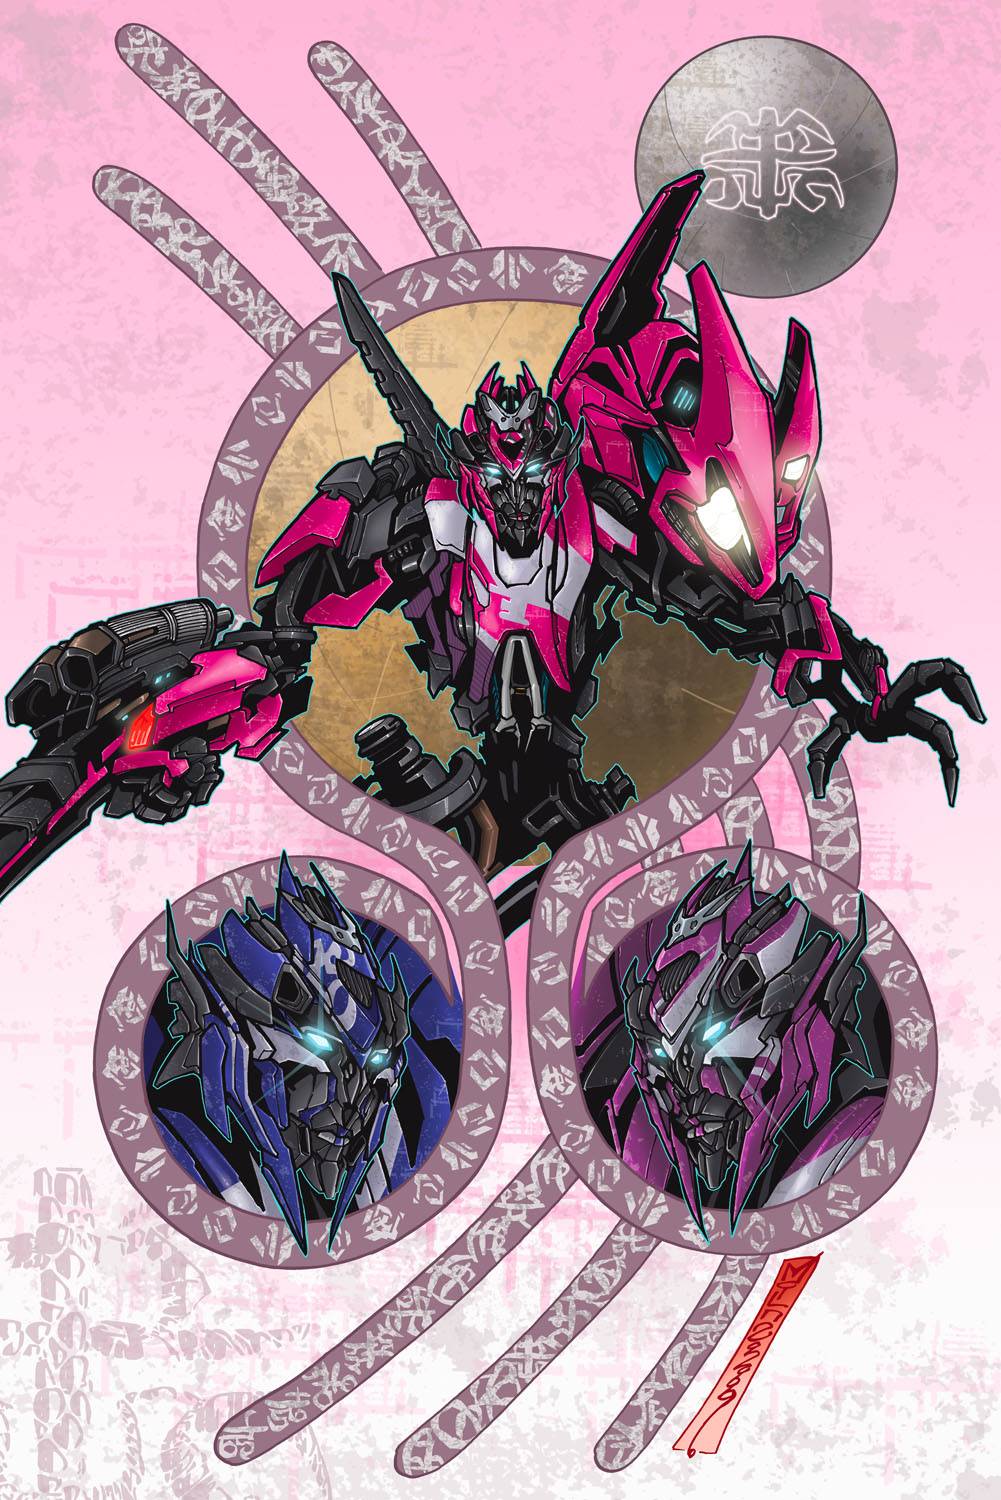 Transformers Tales of the Fallen #6